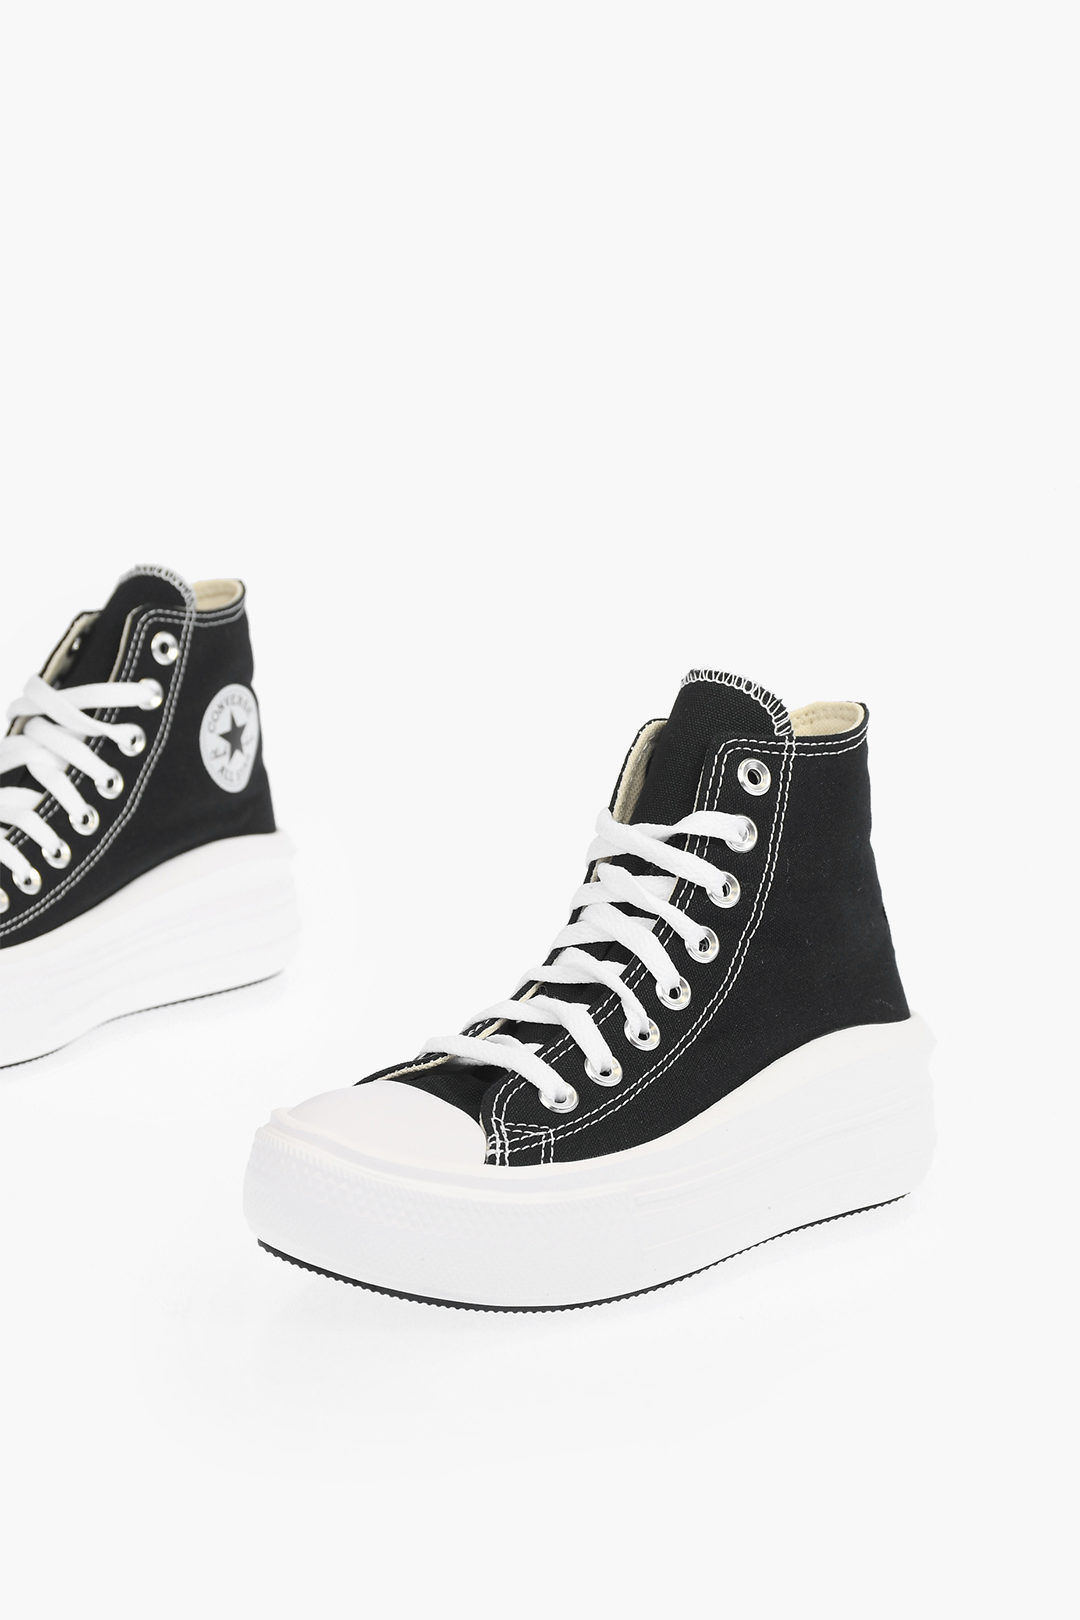 Converse CHUCK TAYLOR ALL STAR with top platform women - 4cm high fabric Glamood sneakers MOVE Outlet